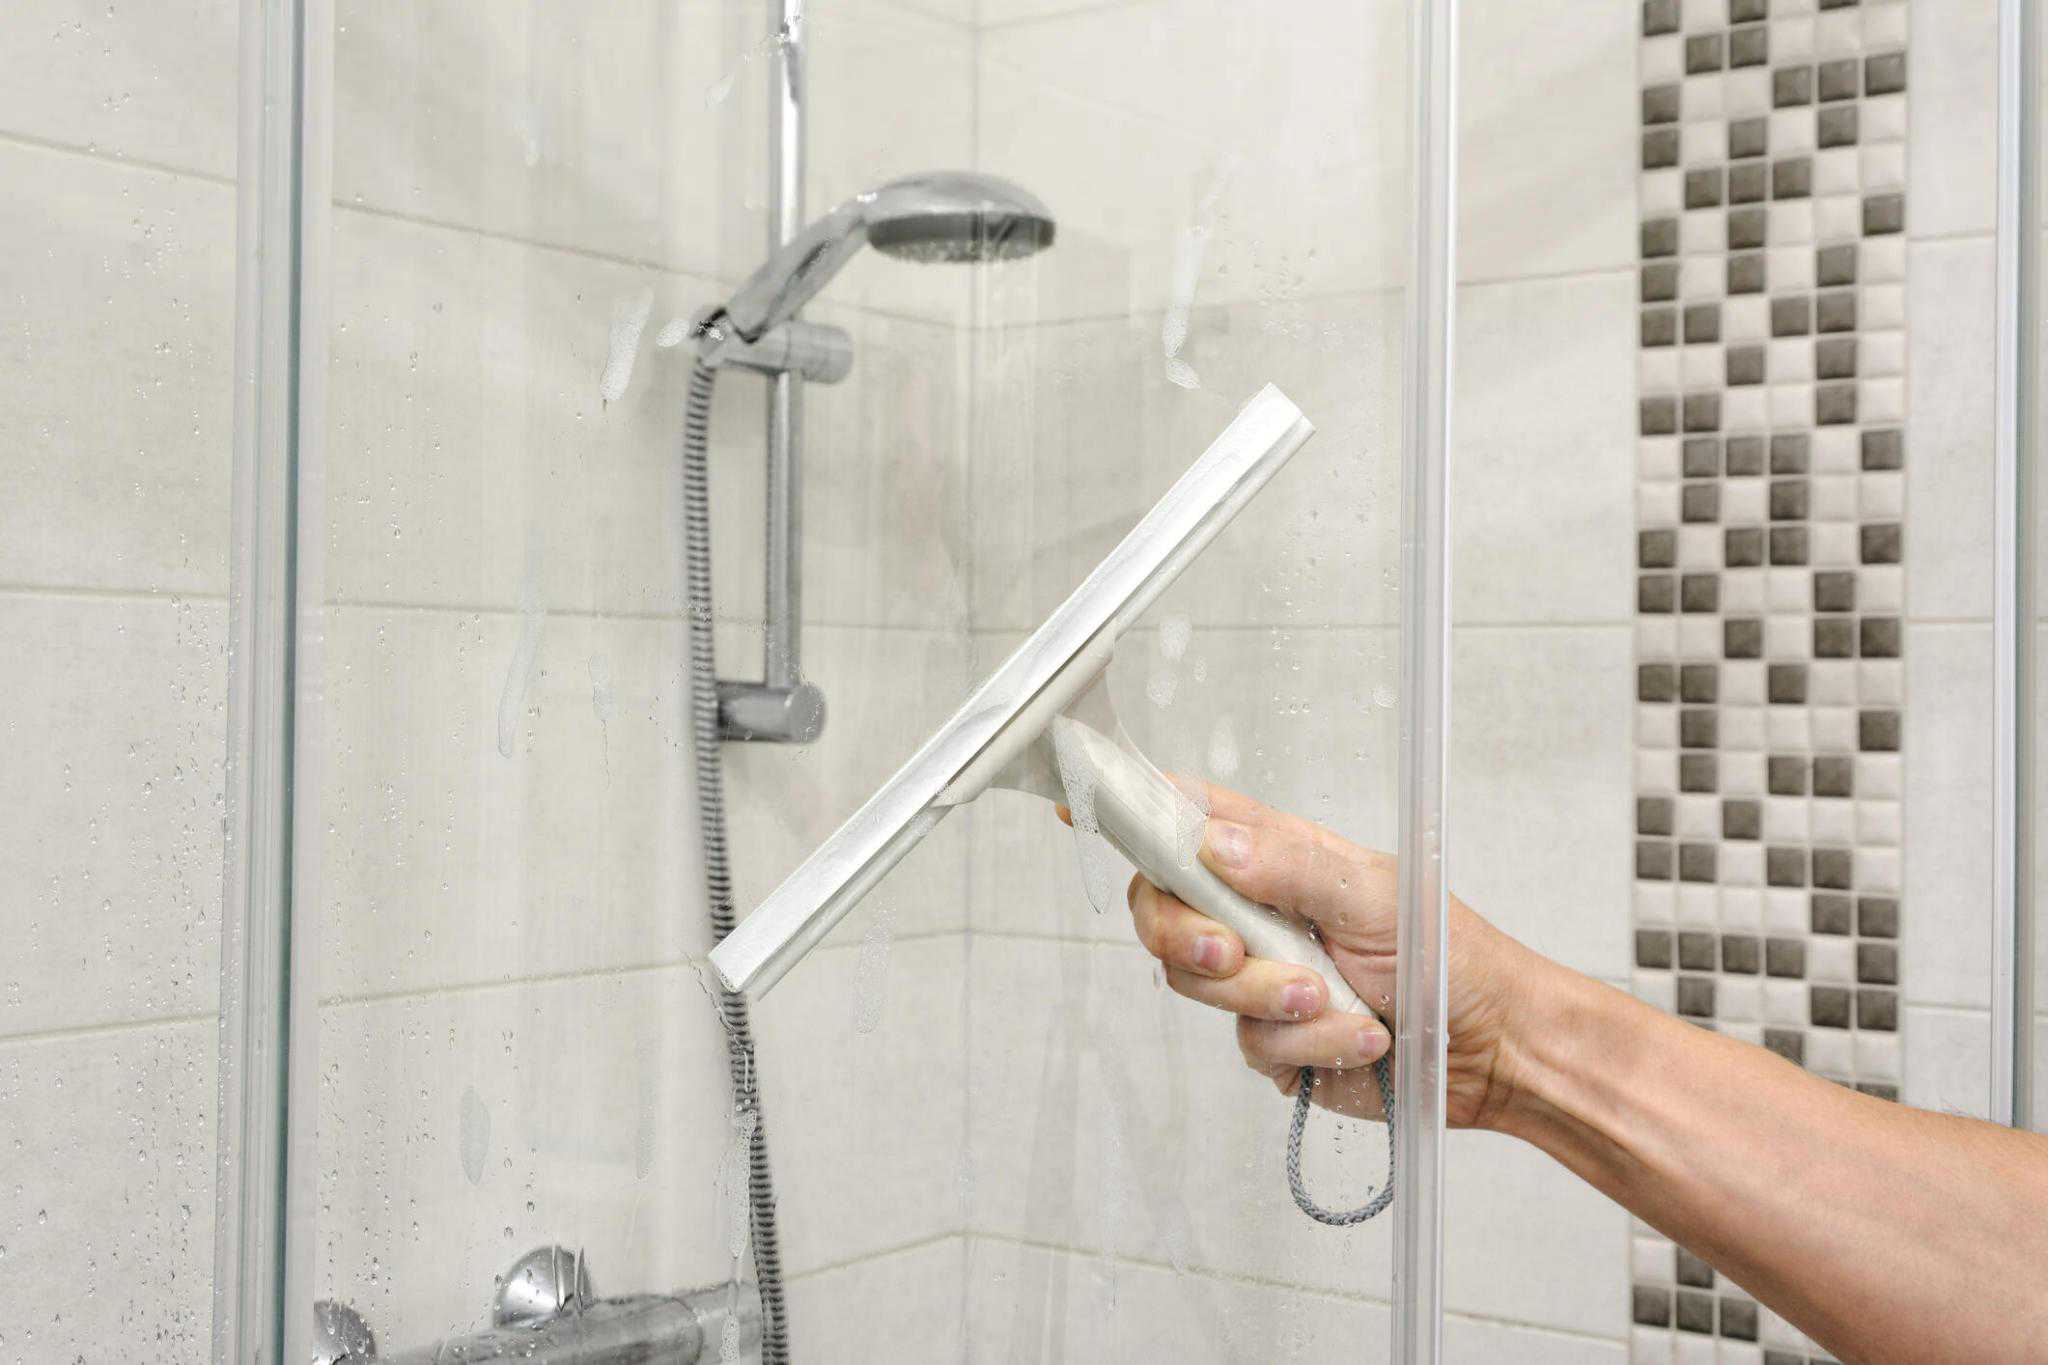 How to Remove Soap Scum Image of a Man Cleaning Shower Doors